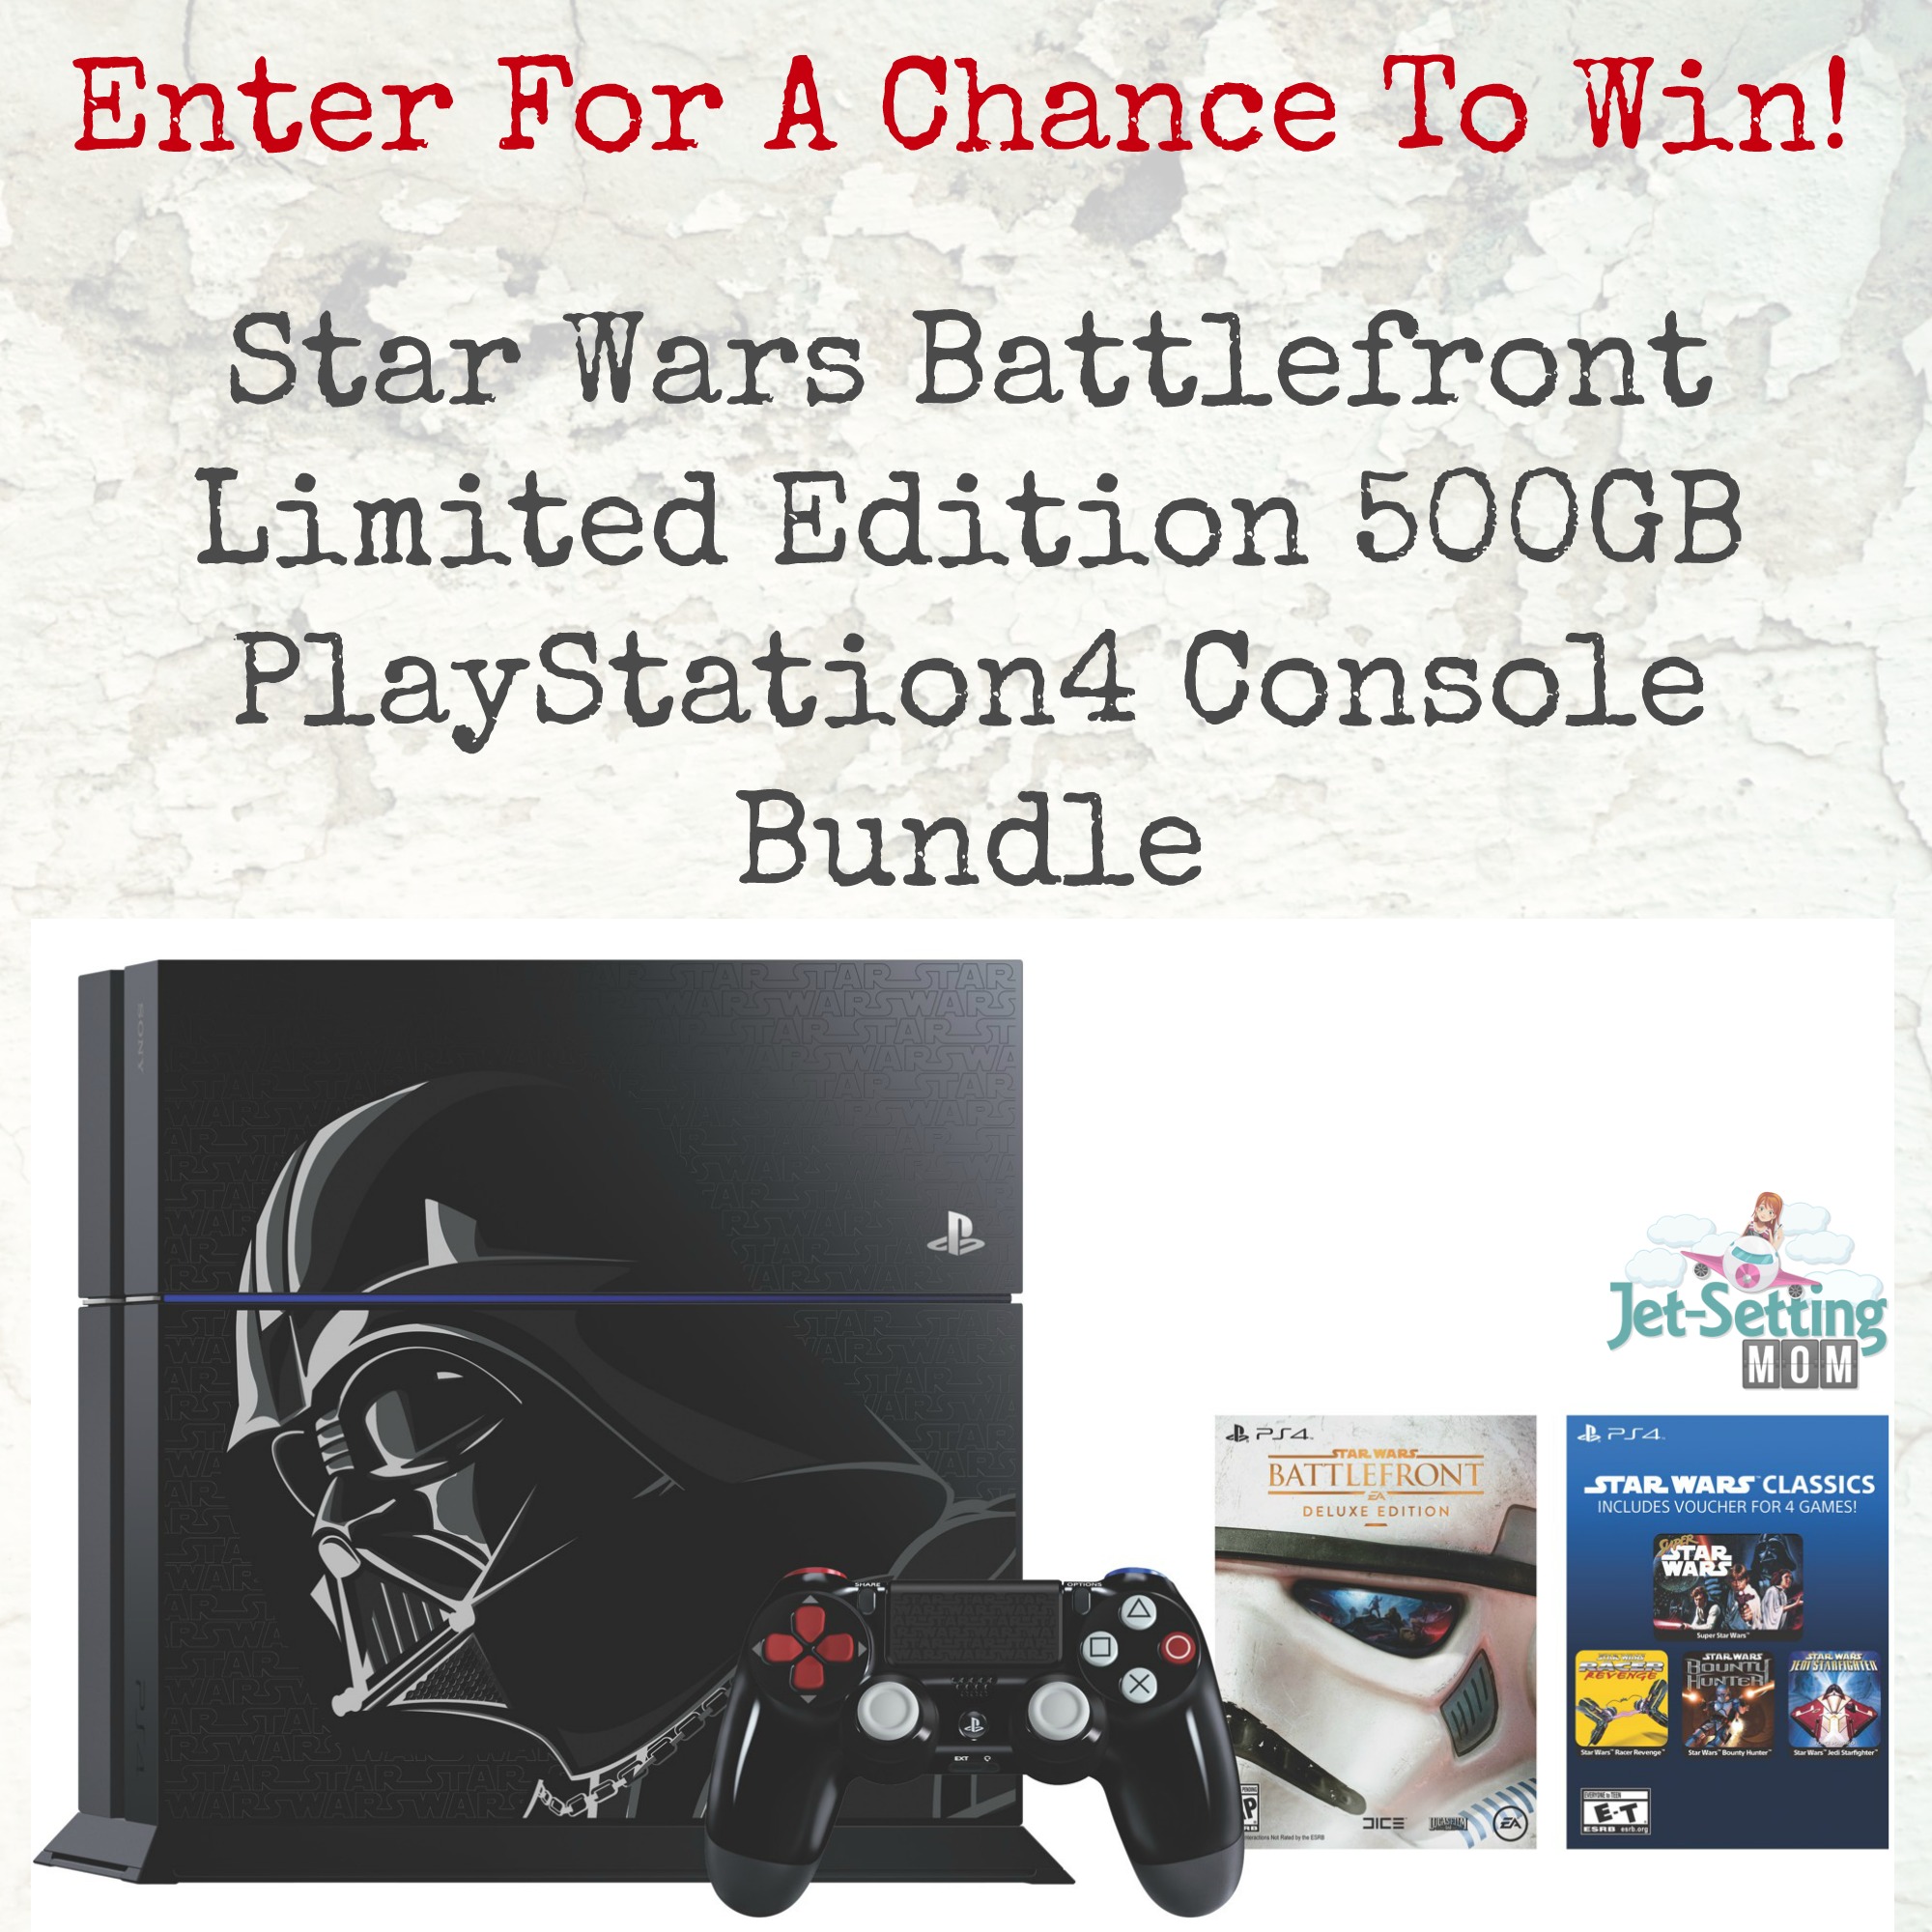 Enter for a chance to win a Star Wars Battlefront PlayStation4 Bundle!